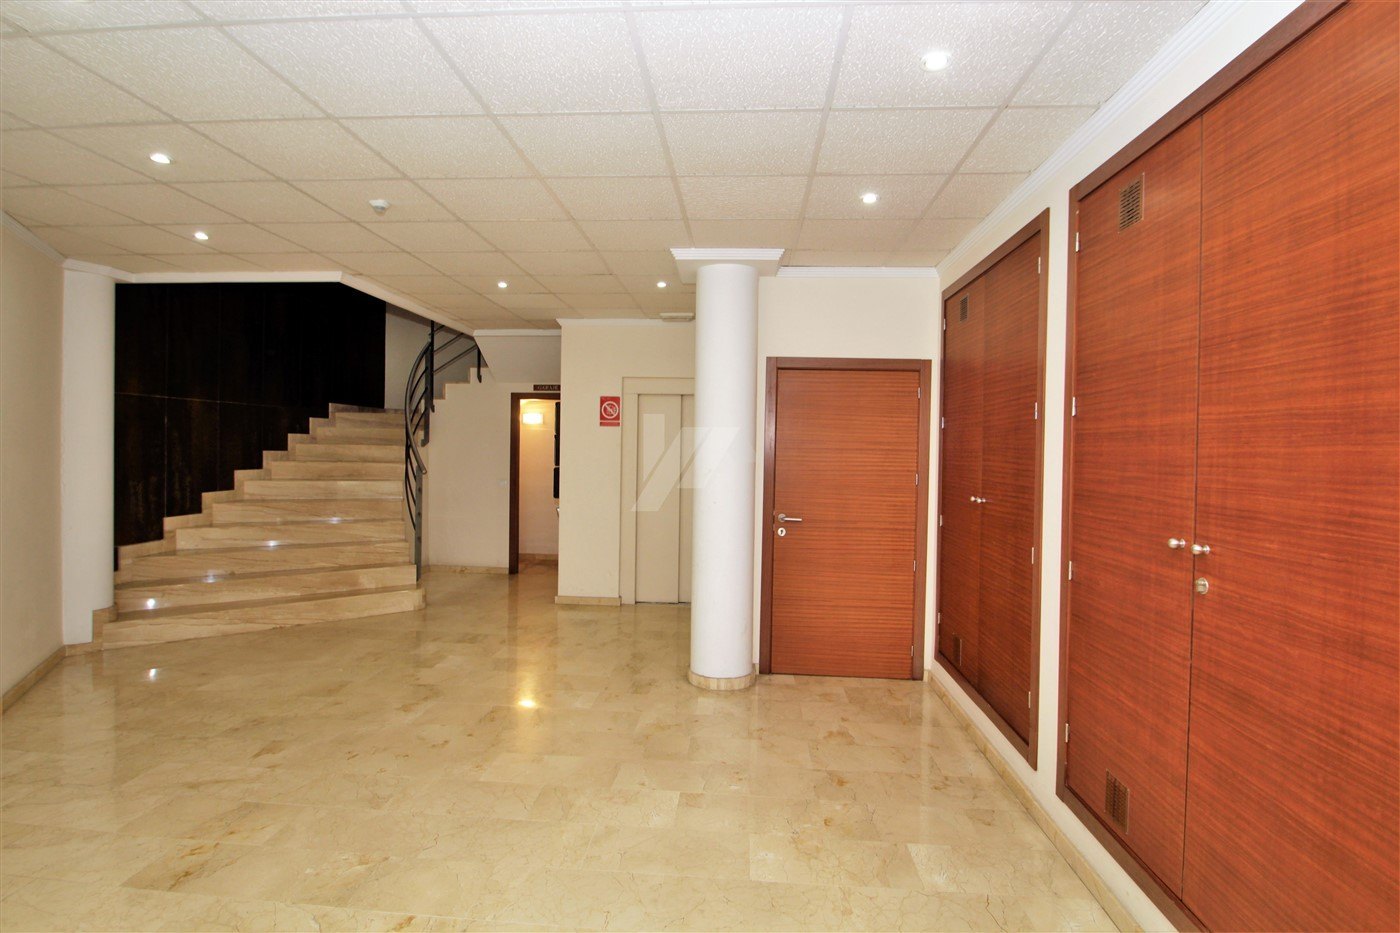 Office space for sale in Teulada, Costa Blanca.